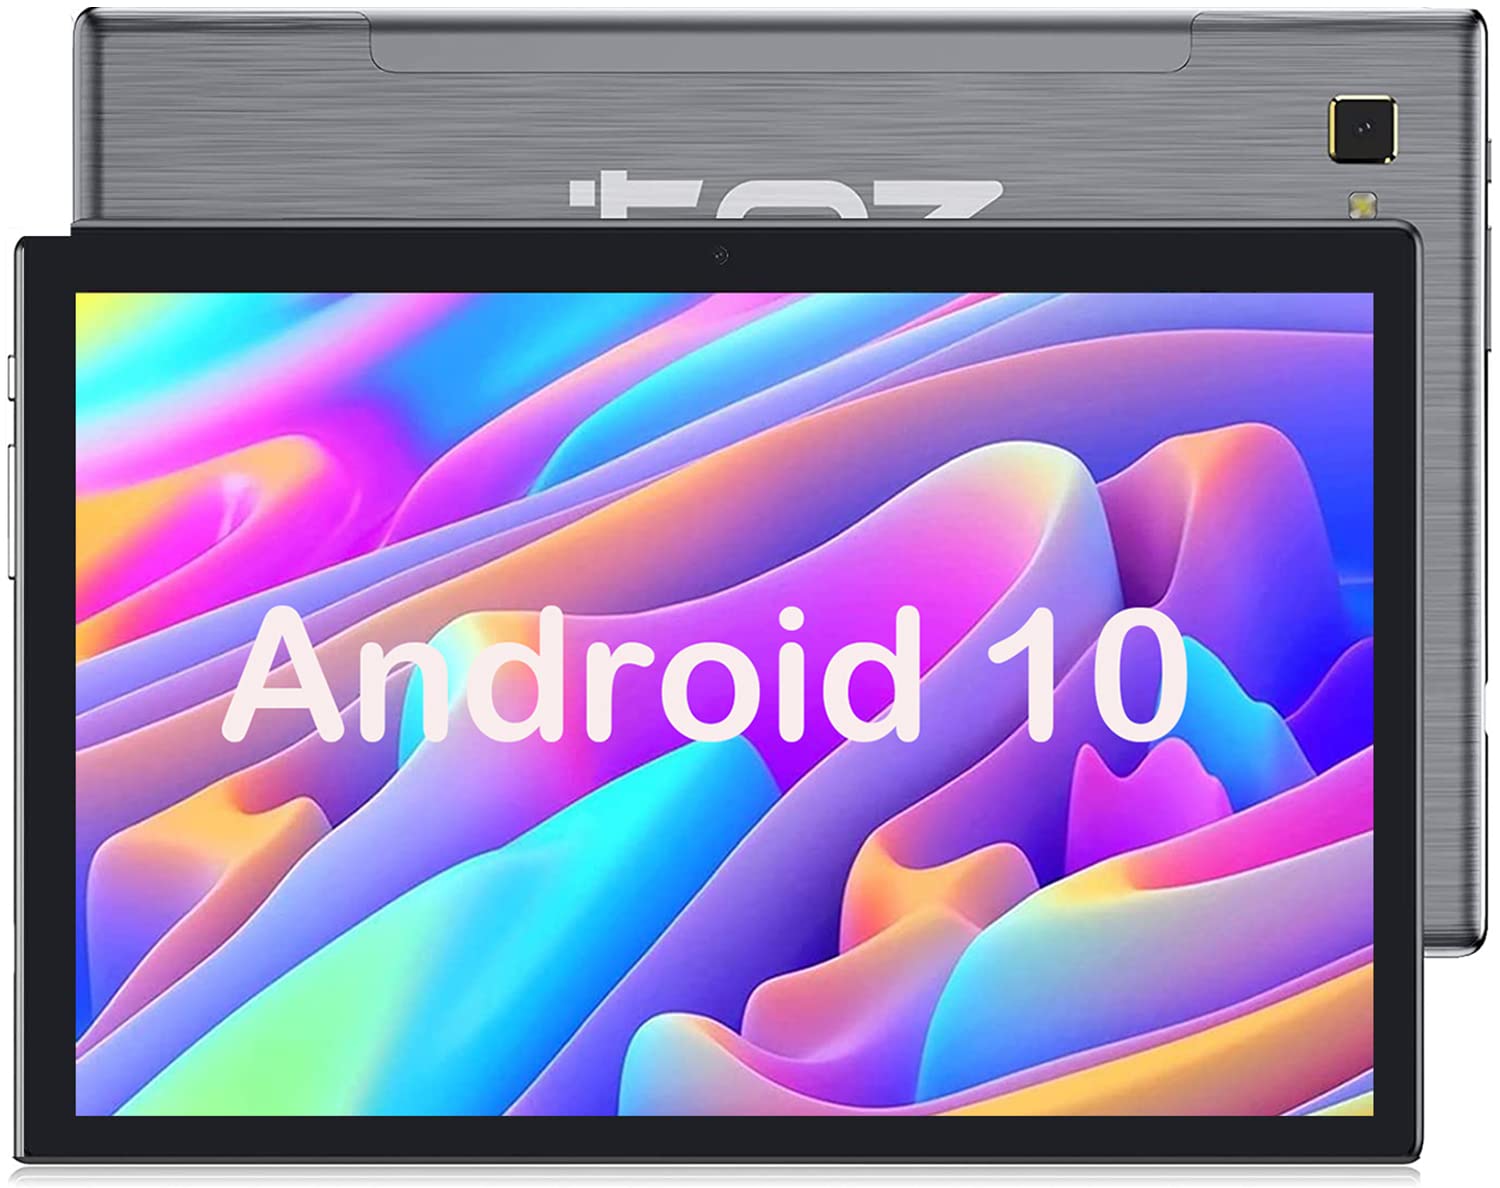 TPZ Tablet 10 Inch Android Tablet, 2023 Latest Octa-Core 32GB Storage Tablet Computer, 6000mAh Battery, Dual 13MP+5MP Camera, WiFi, Bluetooth, GPS, 128GB Expand Support, IPS Full HD Display-Grey